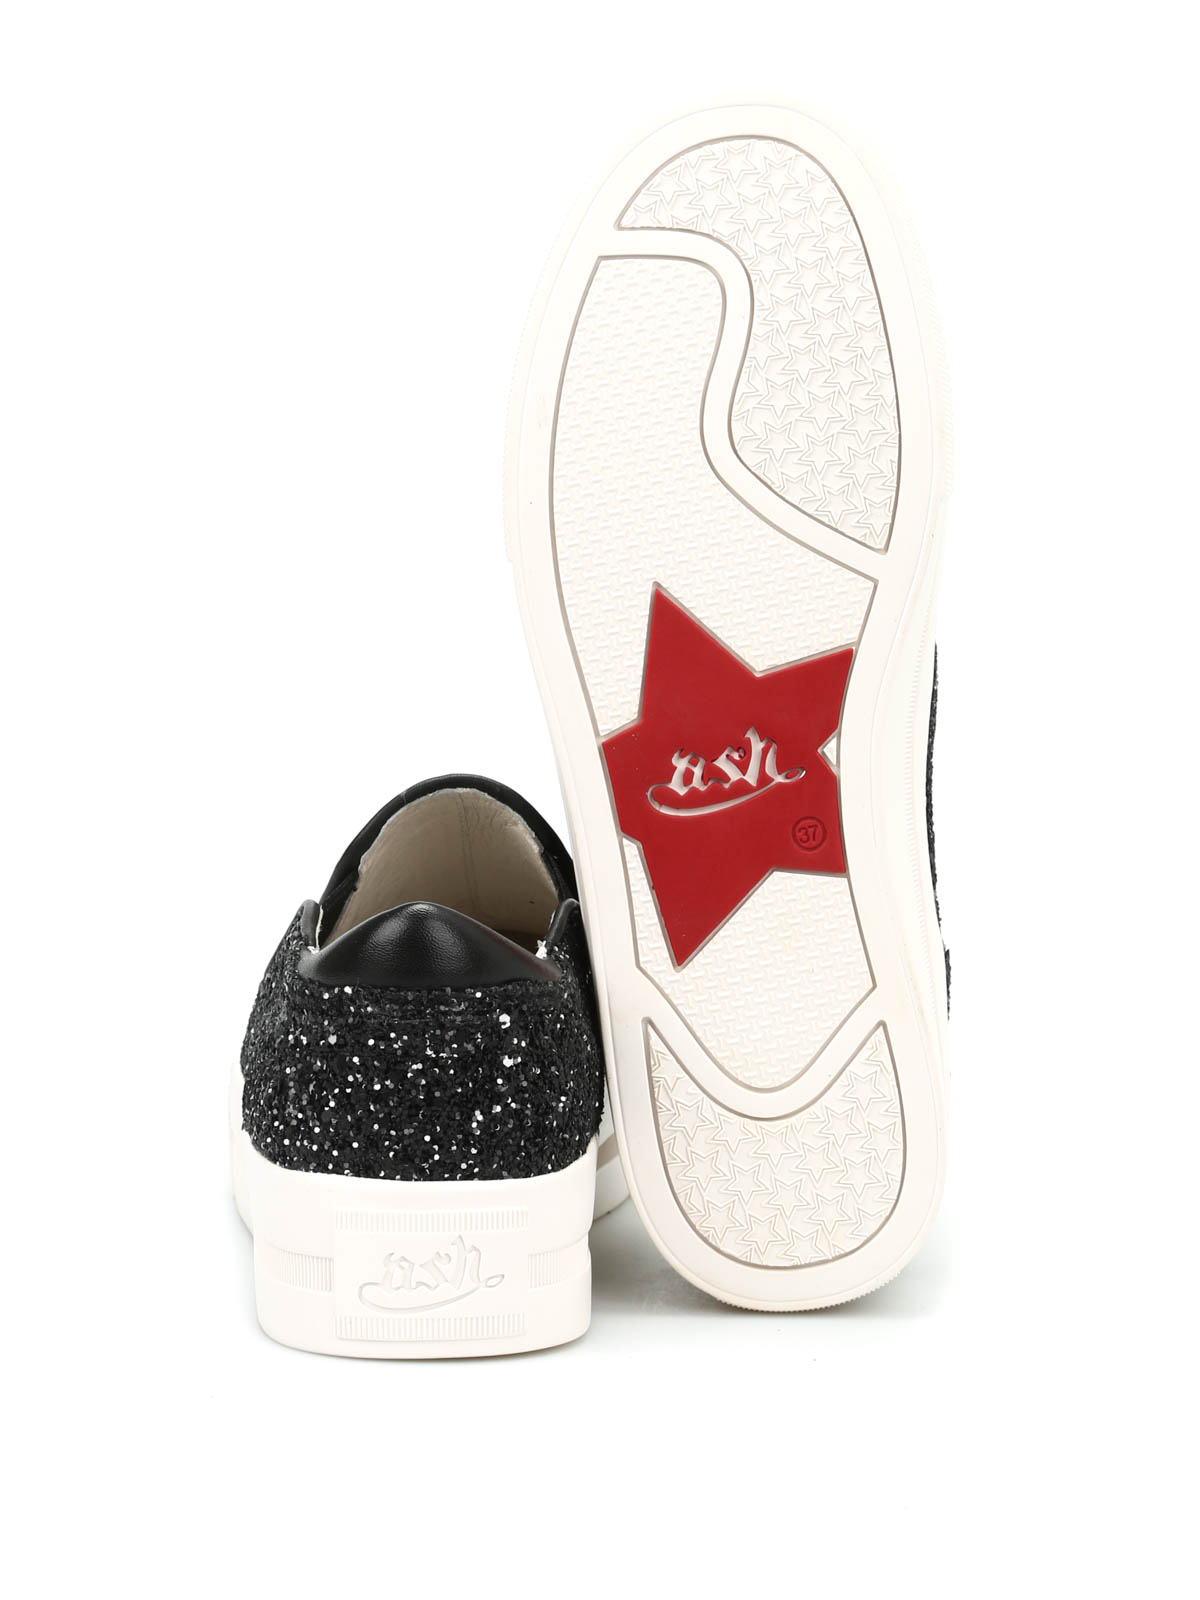 ash slip on trainers